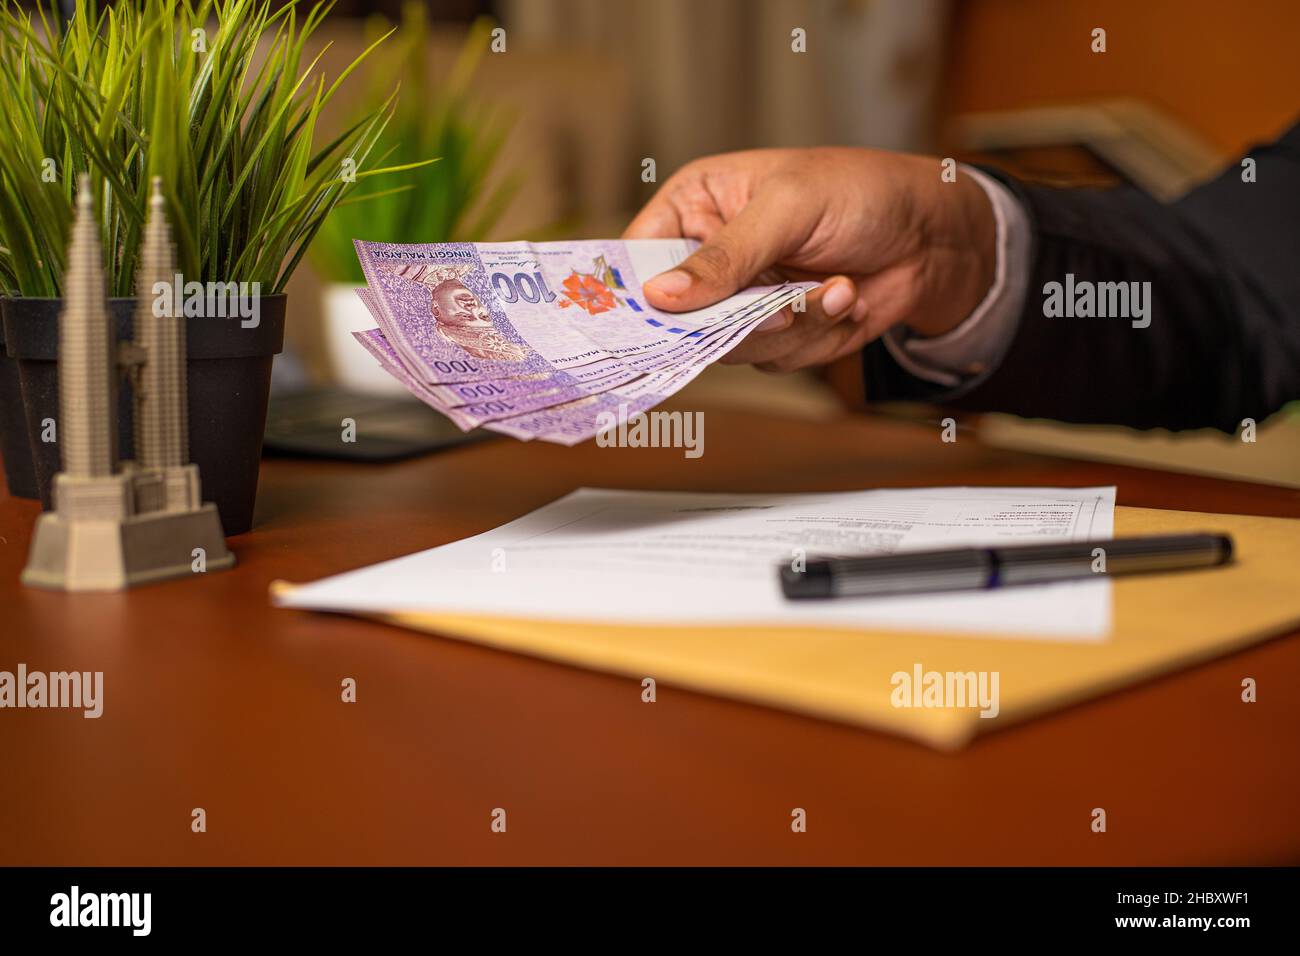 Corrupt Businessman or CEO or Politician hands giving bribe money after signing documents or contracts on an office desk. Venality, bribe, corruption Stock Photo